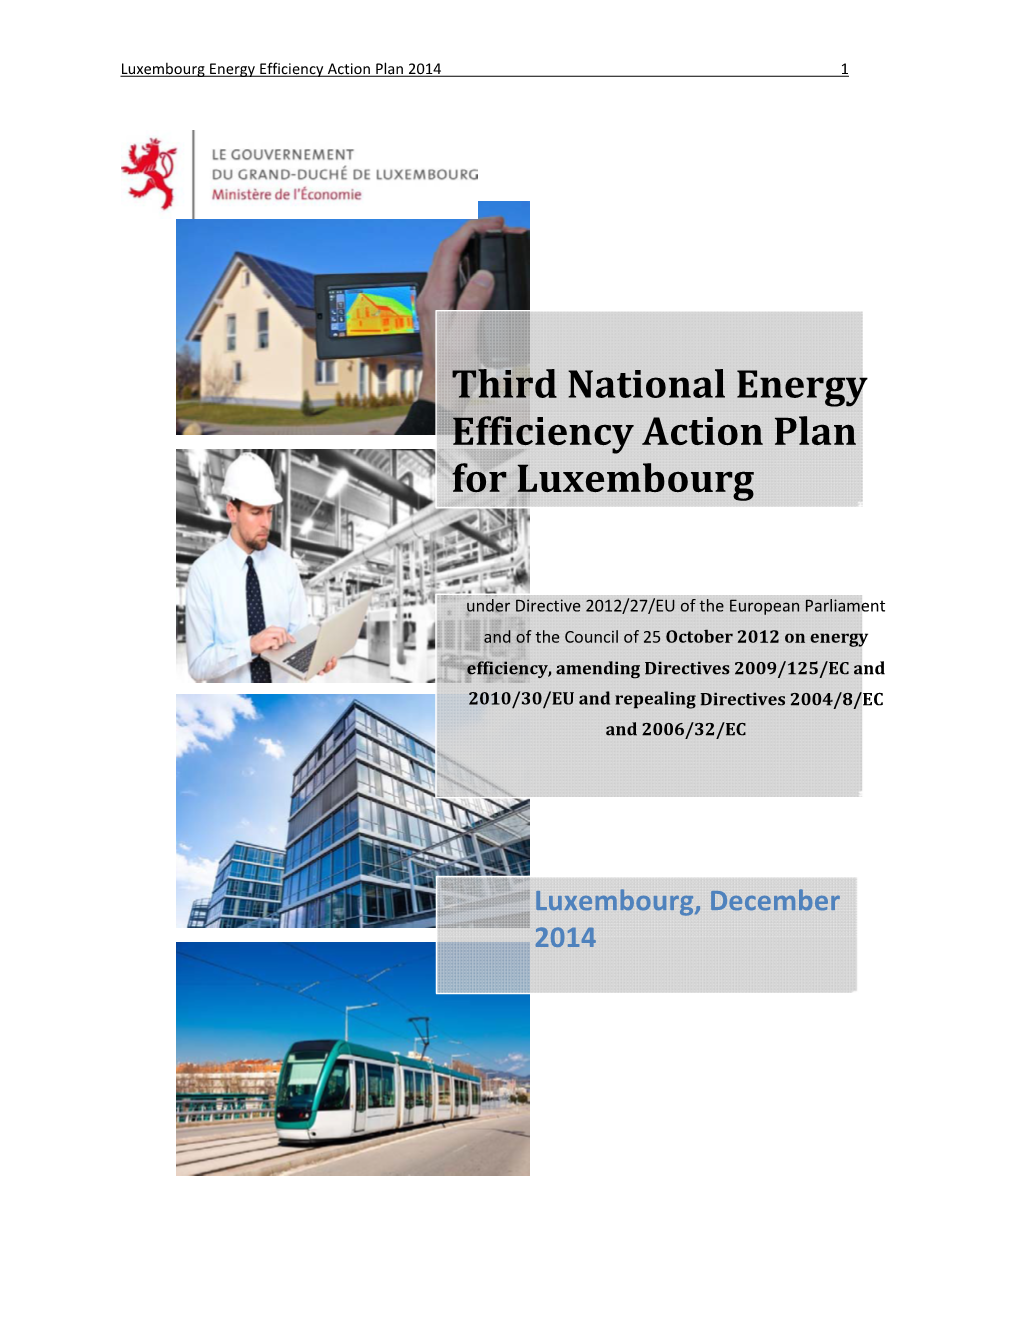 Third National Energy Efficiency Action Plan for Luxembourg